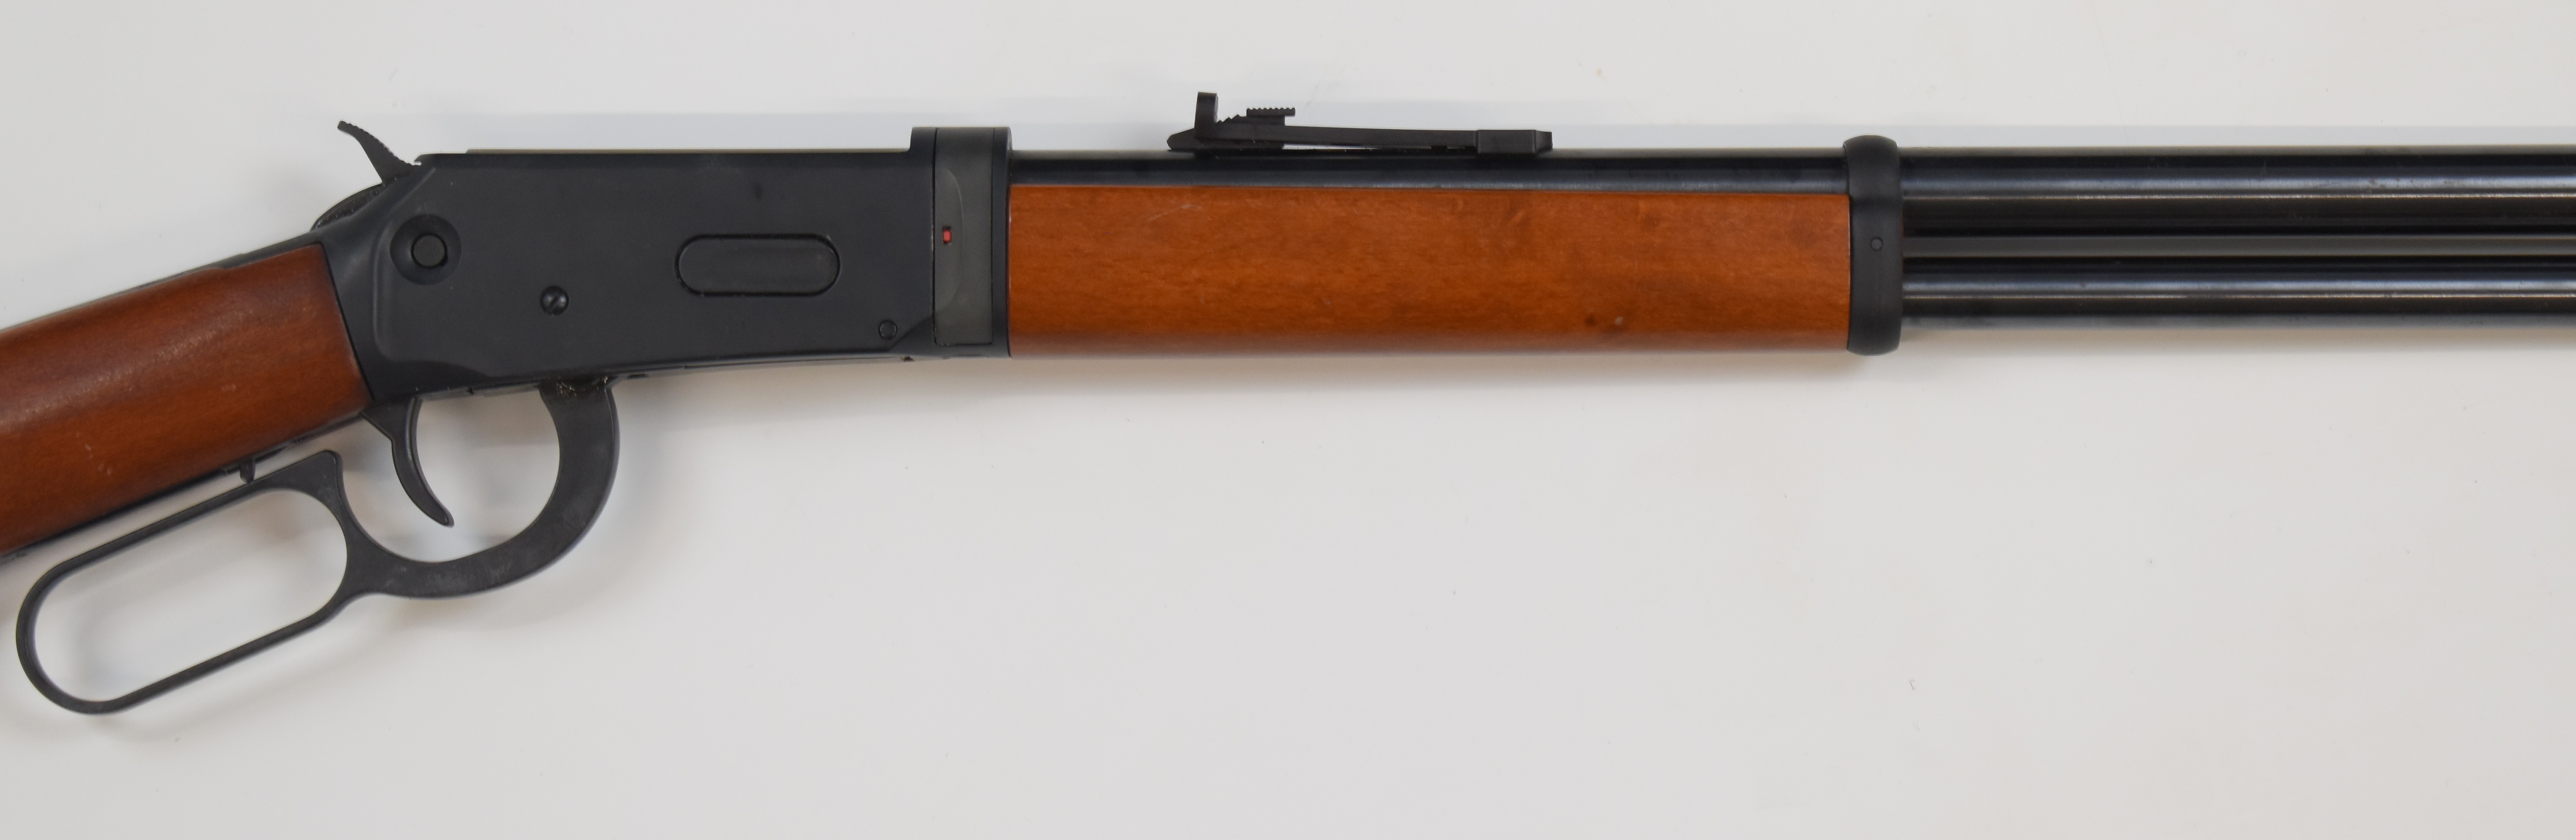 Walther Winchester style lever-action .177 CO2 carbine air rifle with two 8 shot magazines, - Image 4 of 11